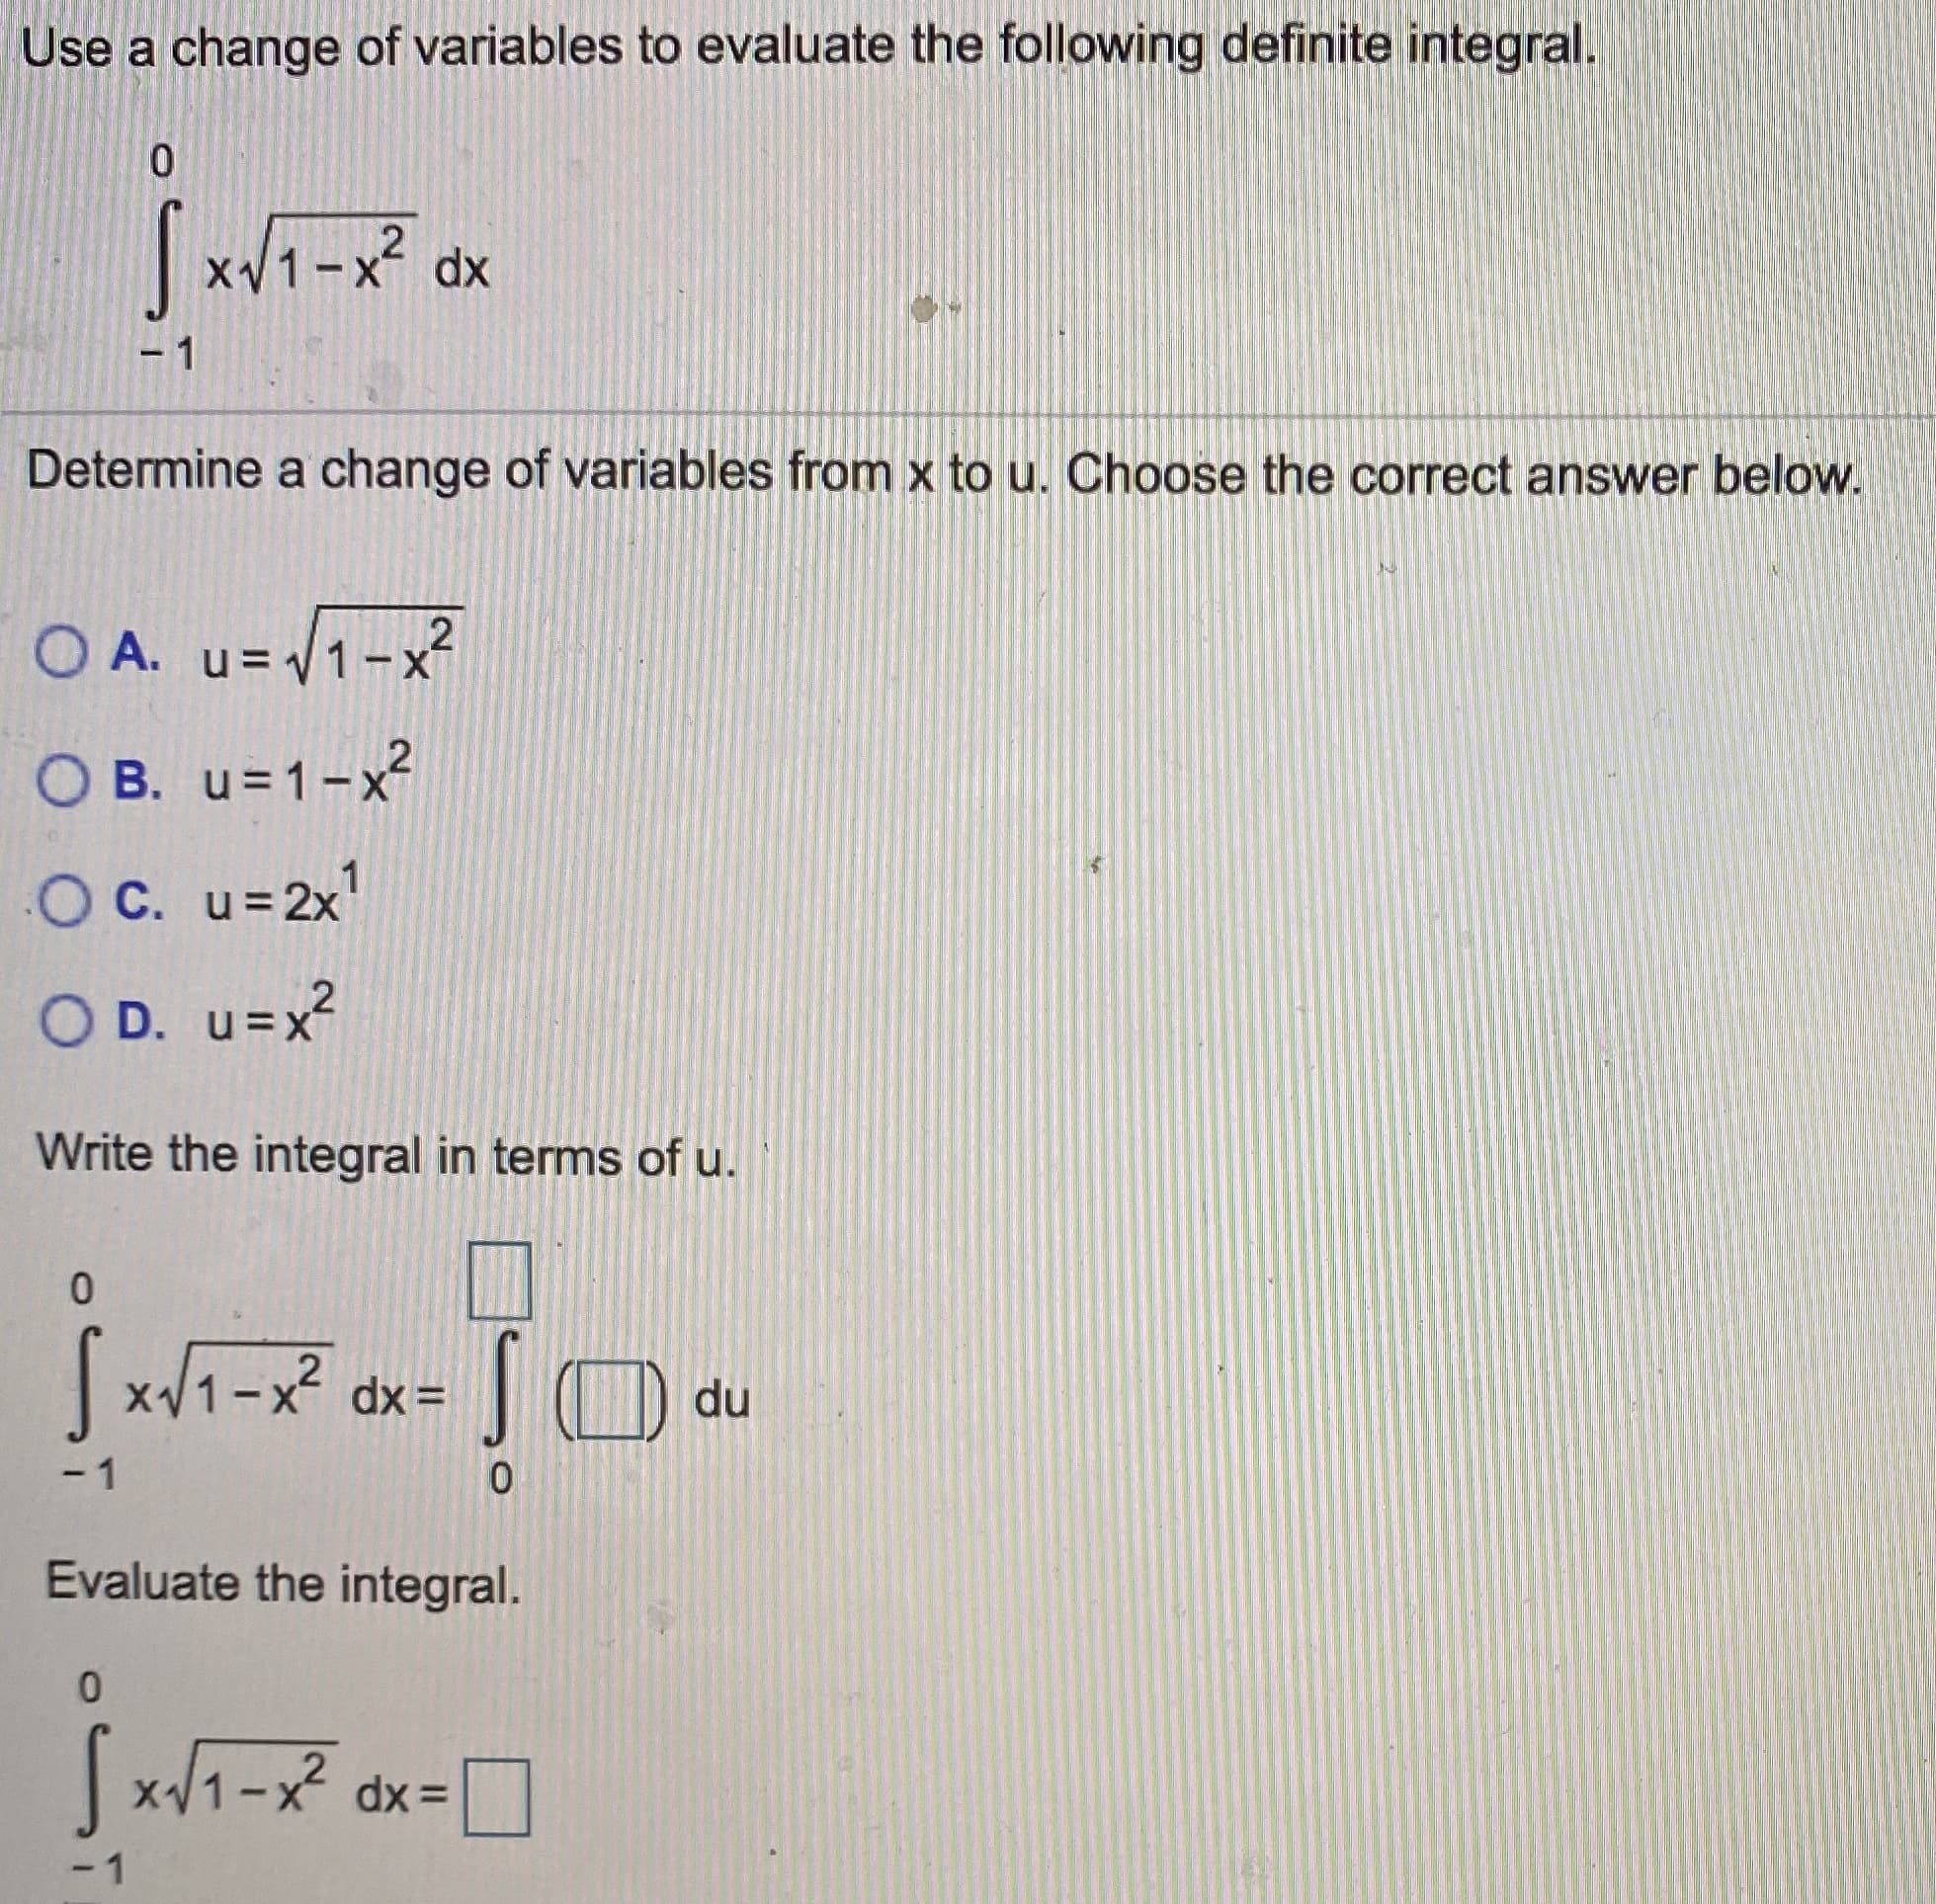 Use a change of variables to evaluate the following definite integral.
.2
XV
- 1
|
